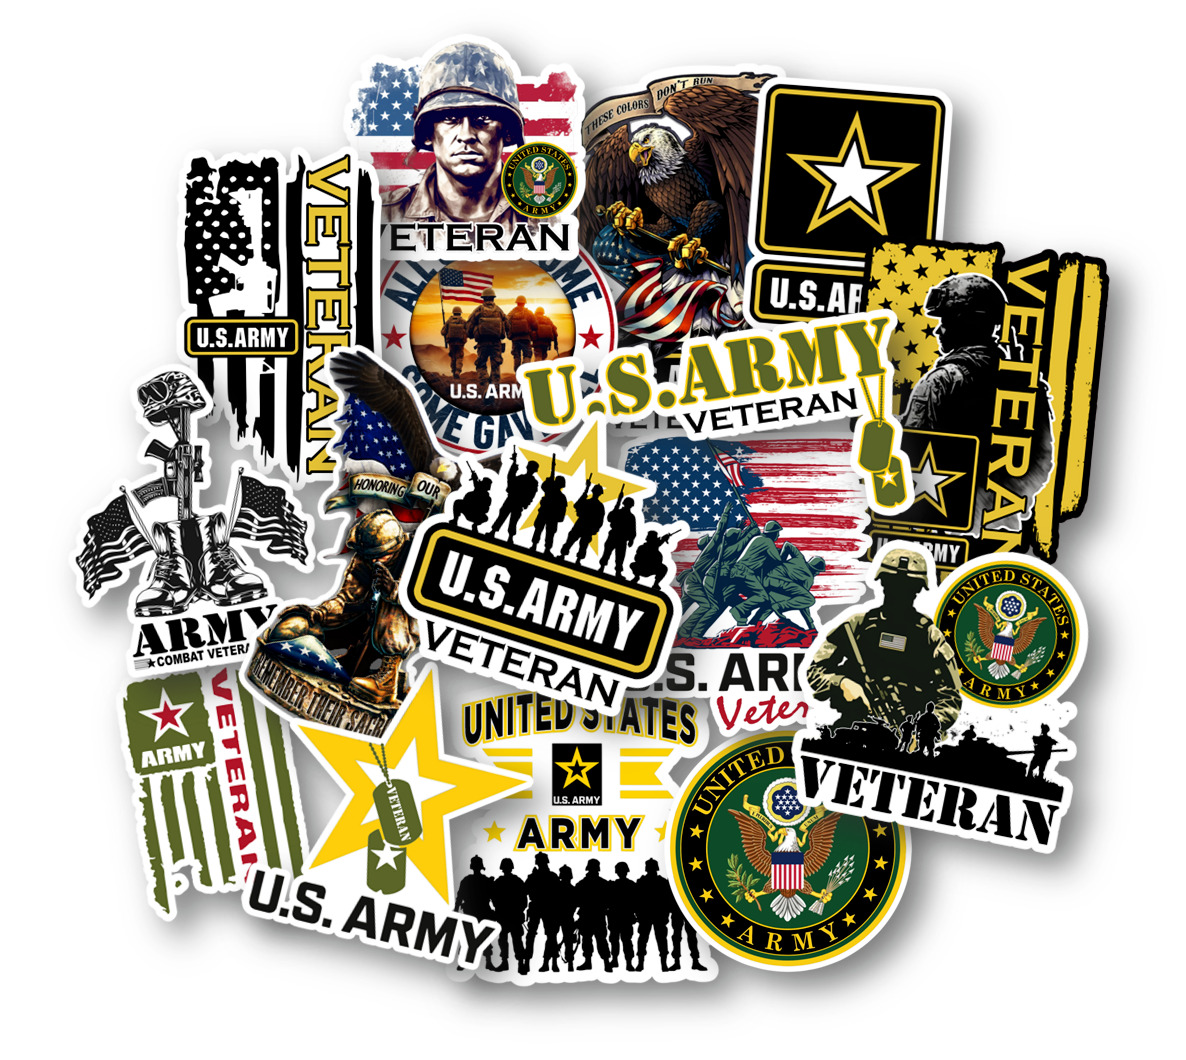 Army Veteran 15 pc Vinyl Sticker Pack - Military Decals for Car, Laptop, Gear